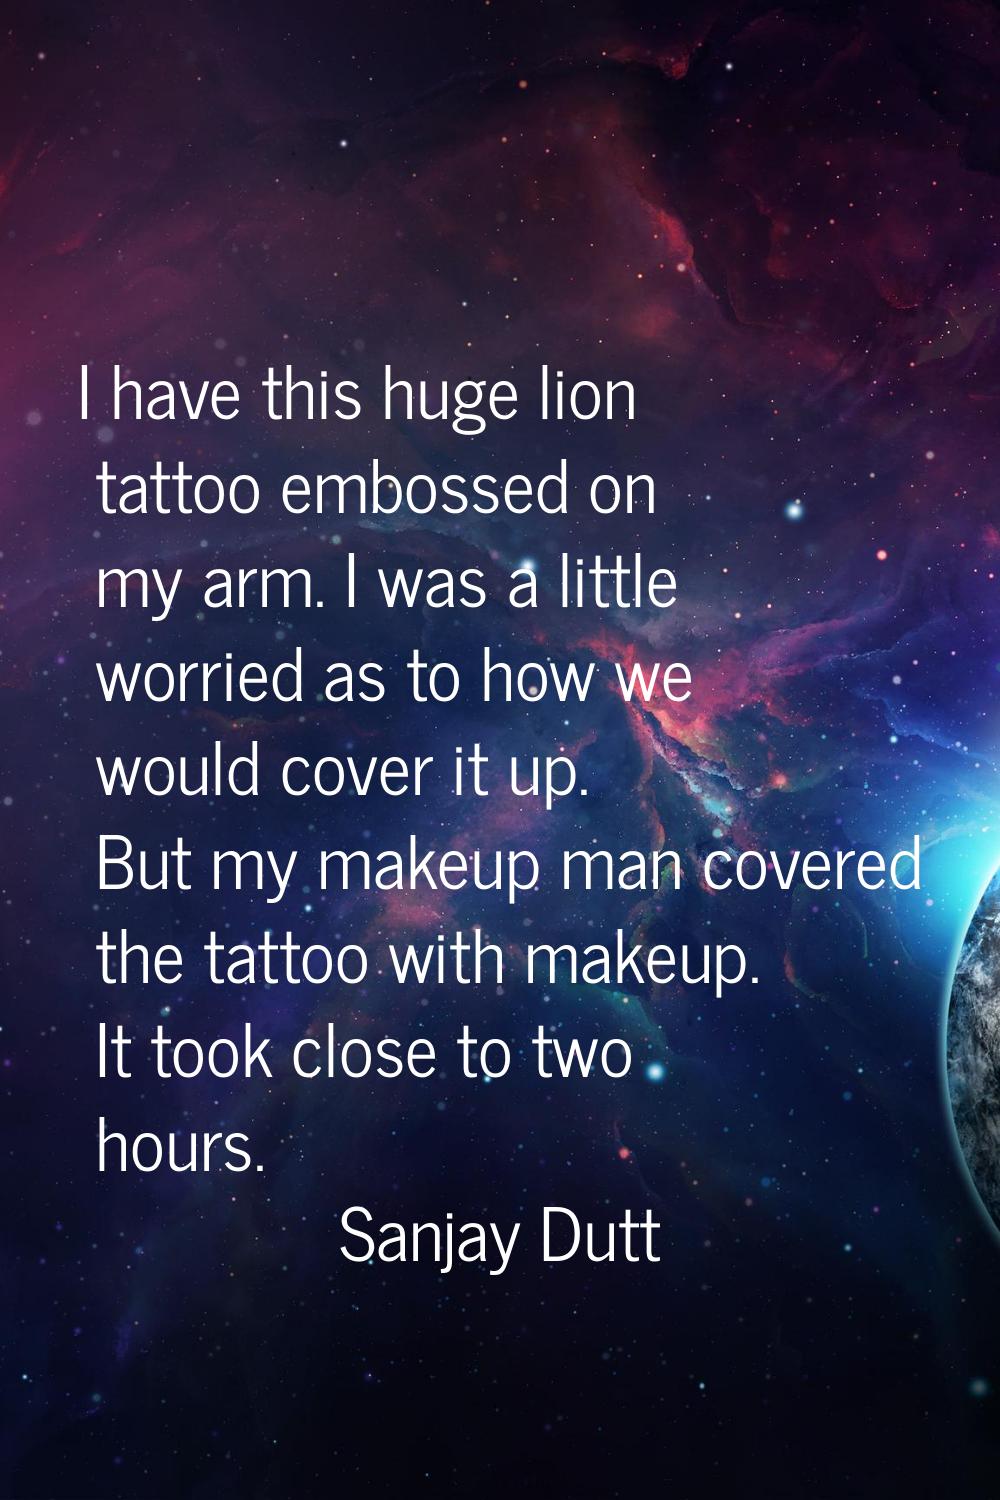 I have this huge lion tattoo embossed on my arm. I was a little worried as to how we would cover it